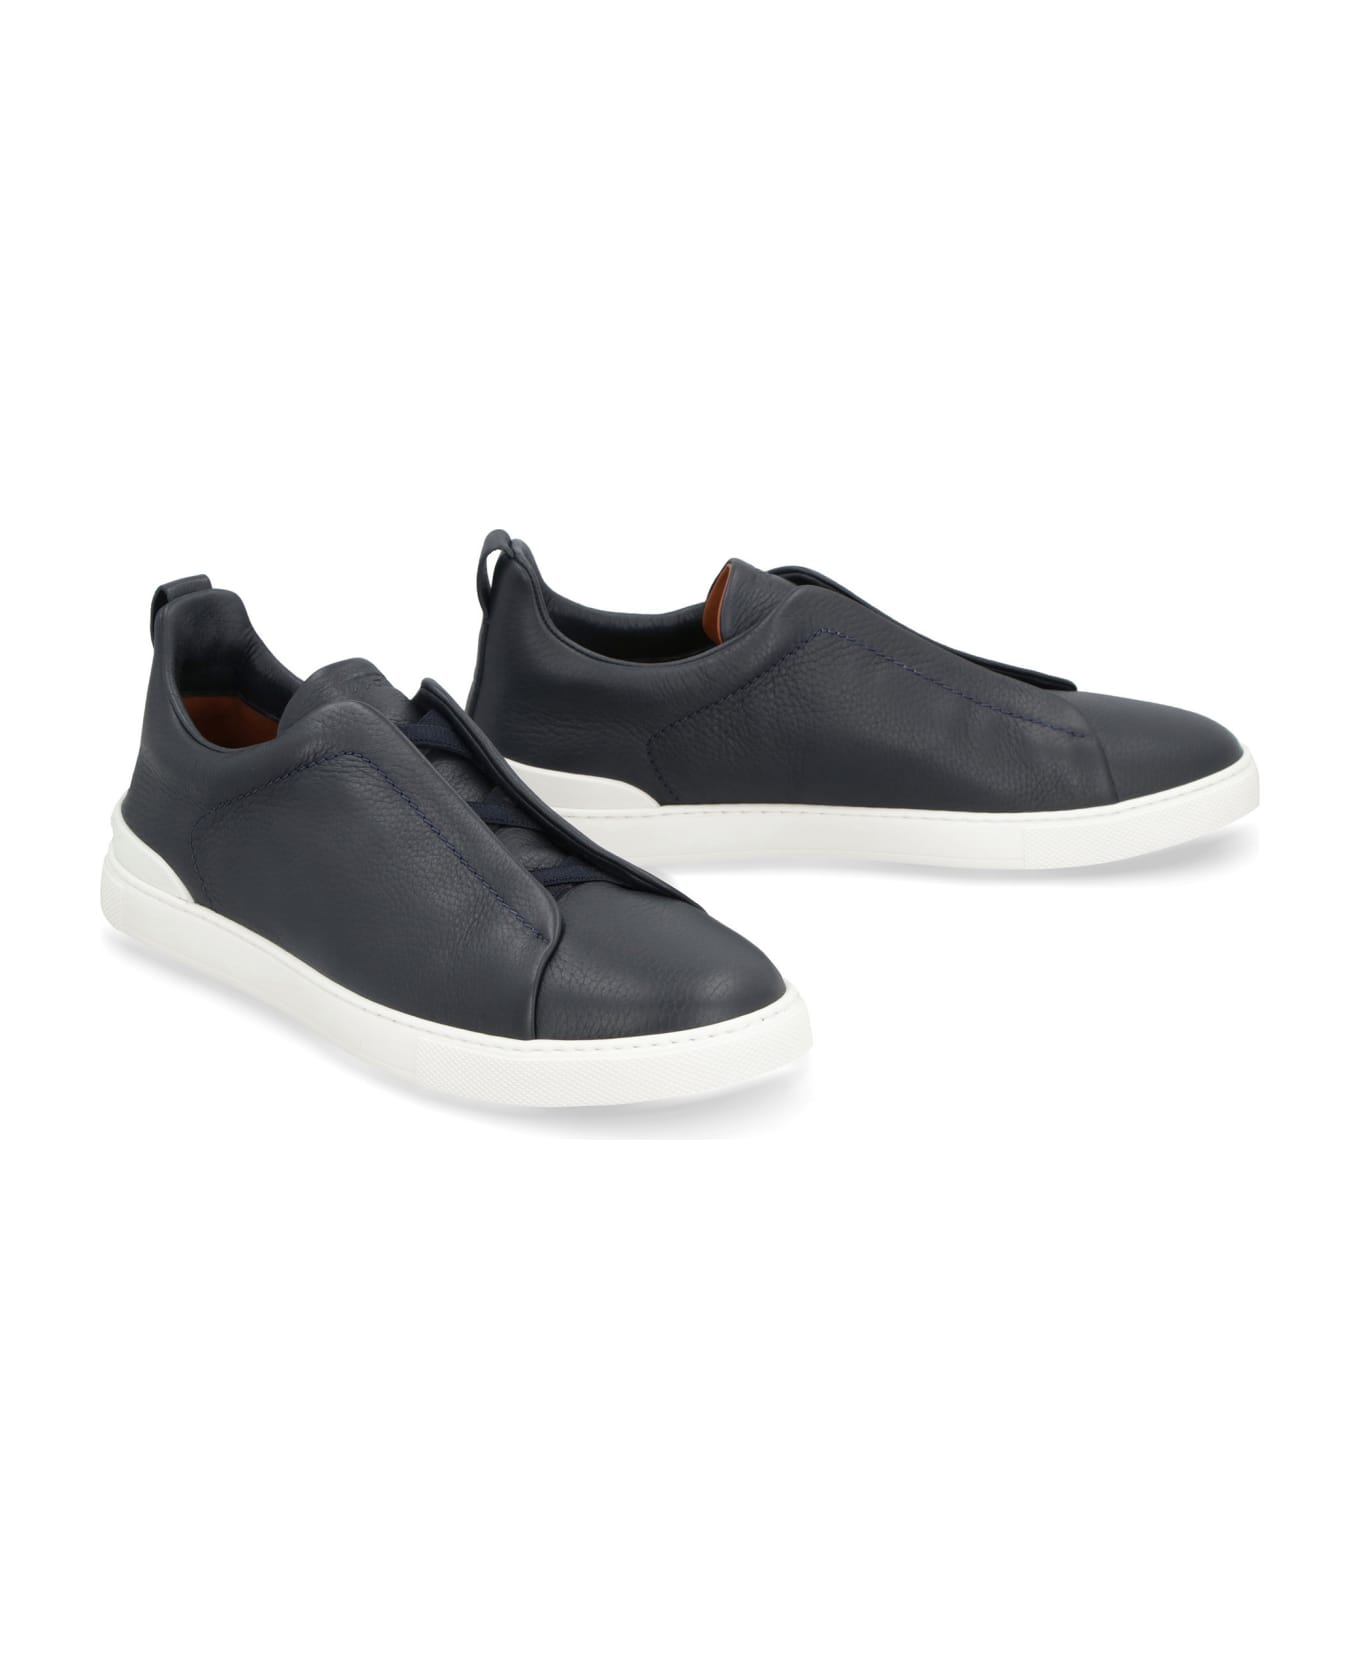 Zegna Triple Stitch Leather Sneakers - blue スニーカー